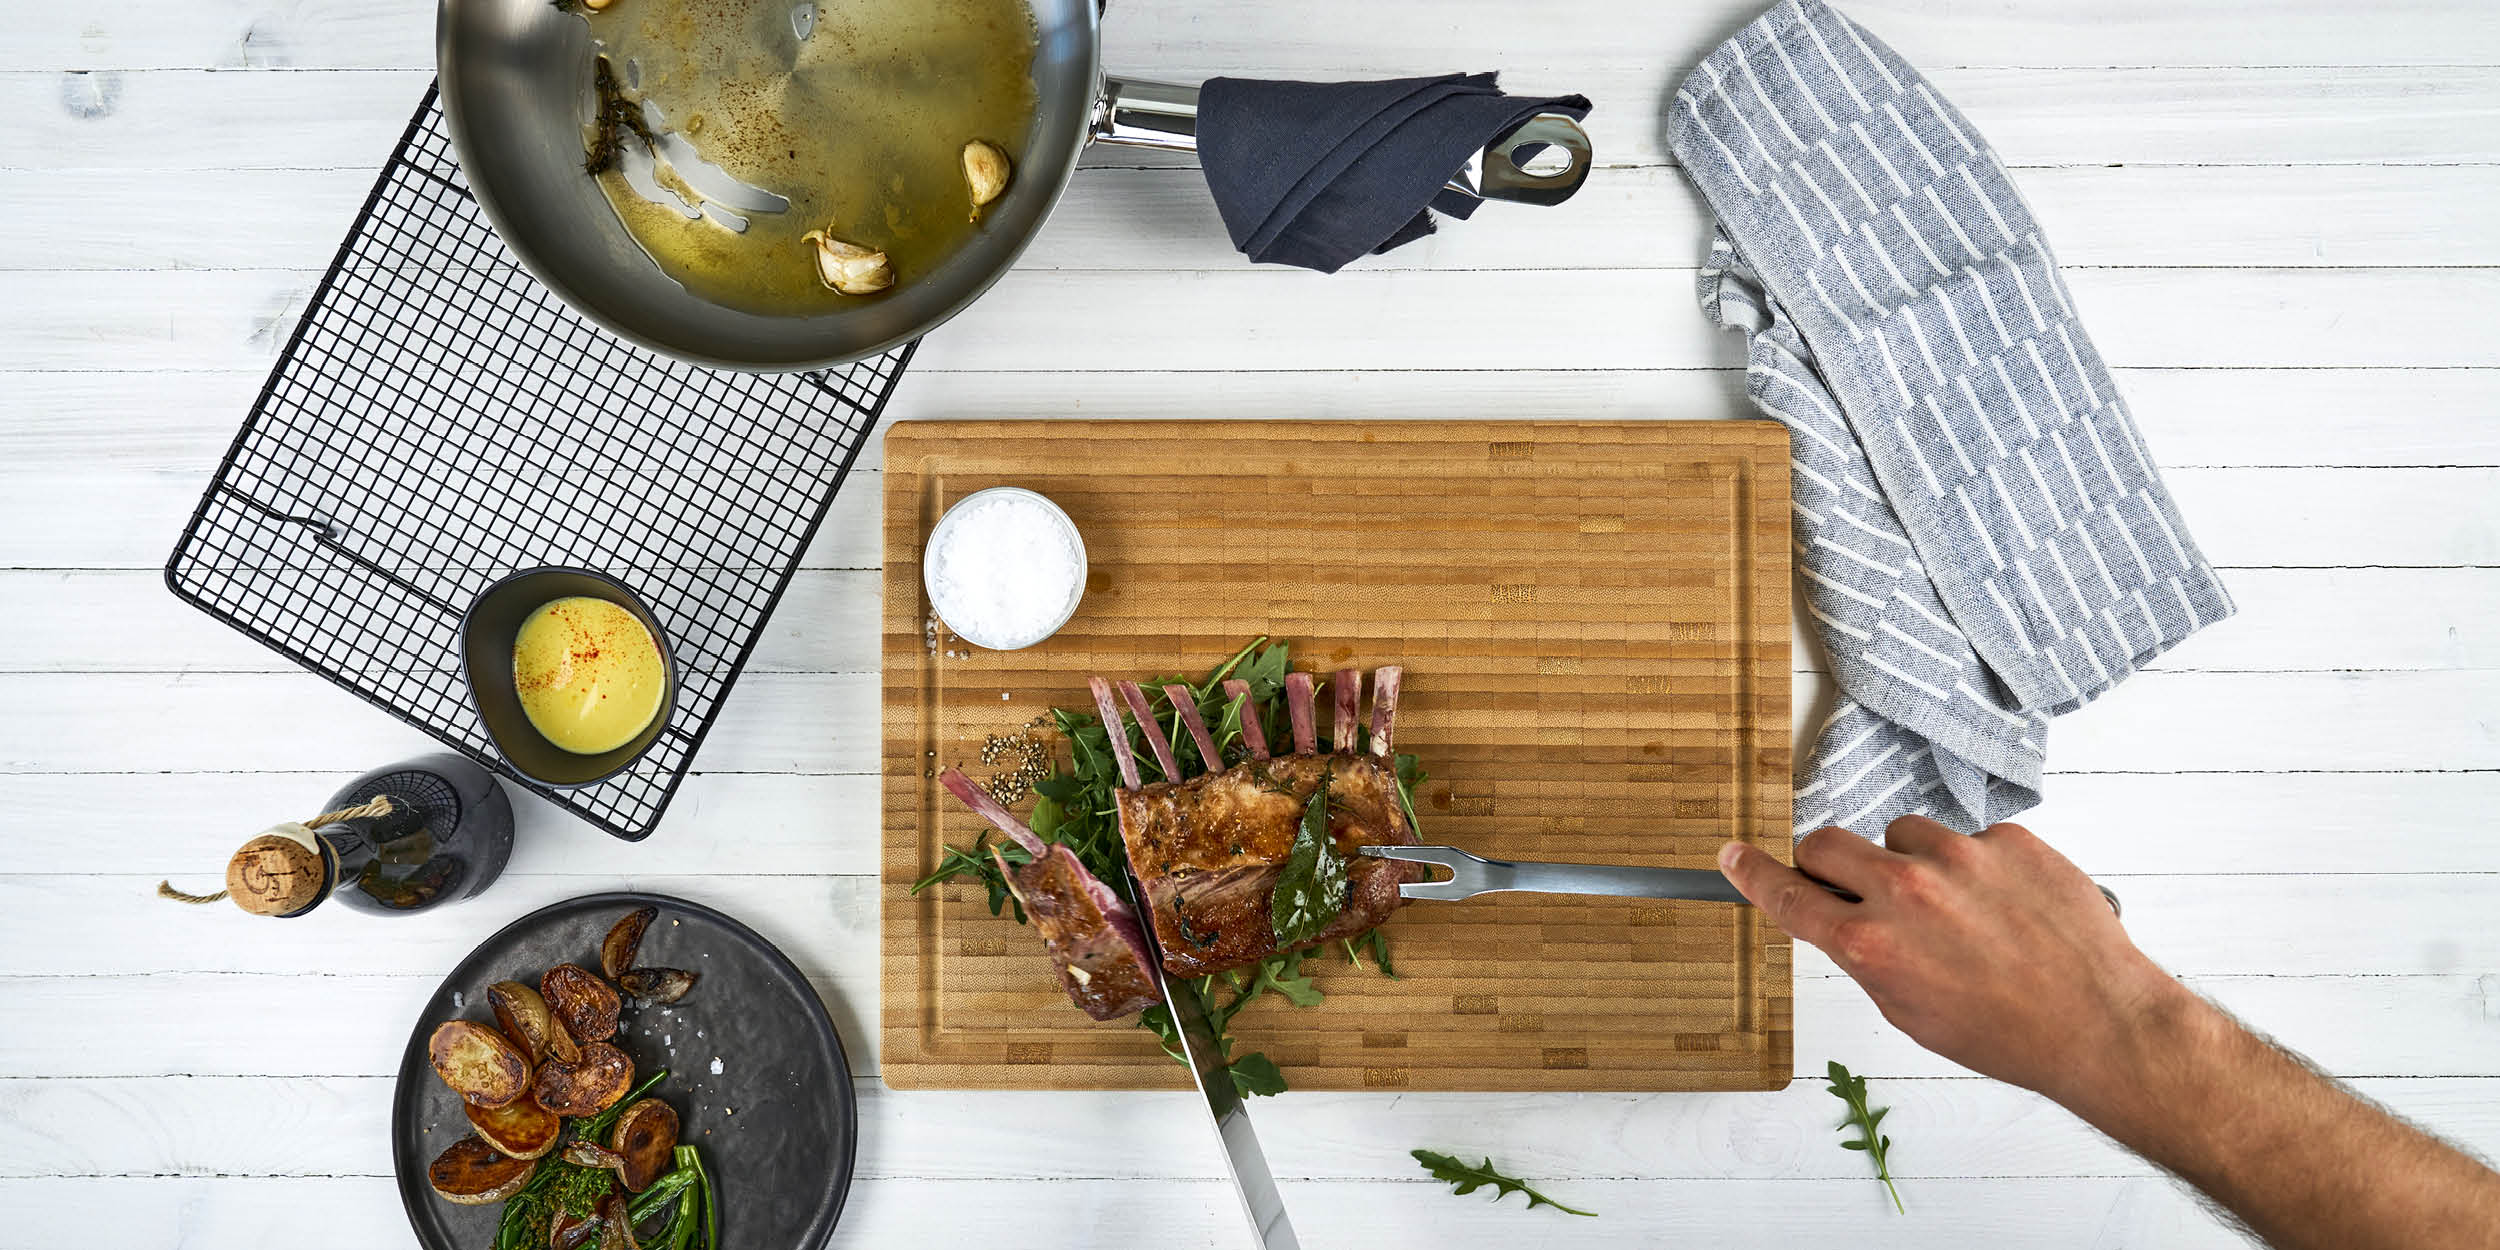 https://www.zwilling.com/on/demandware.static/-/Sites-zwilling-ca-Library/default/dw90e33789/images/product-content/masonry-content/zwilling/cutlery/cutting-boards/30772-400-0_Lifestyle_Image_Series_OS_1200x600.jpg